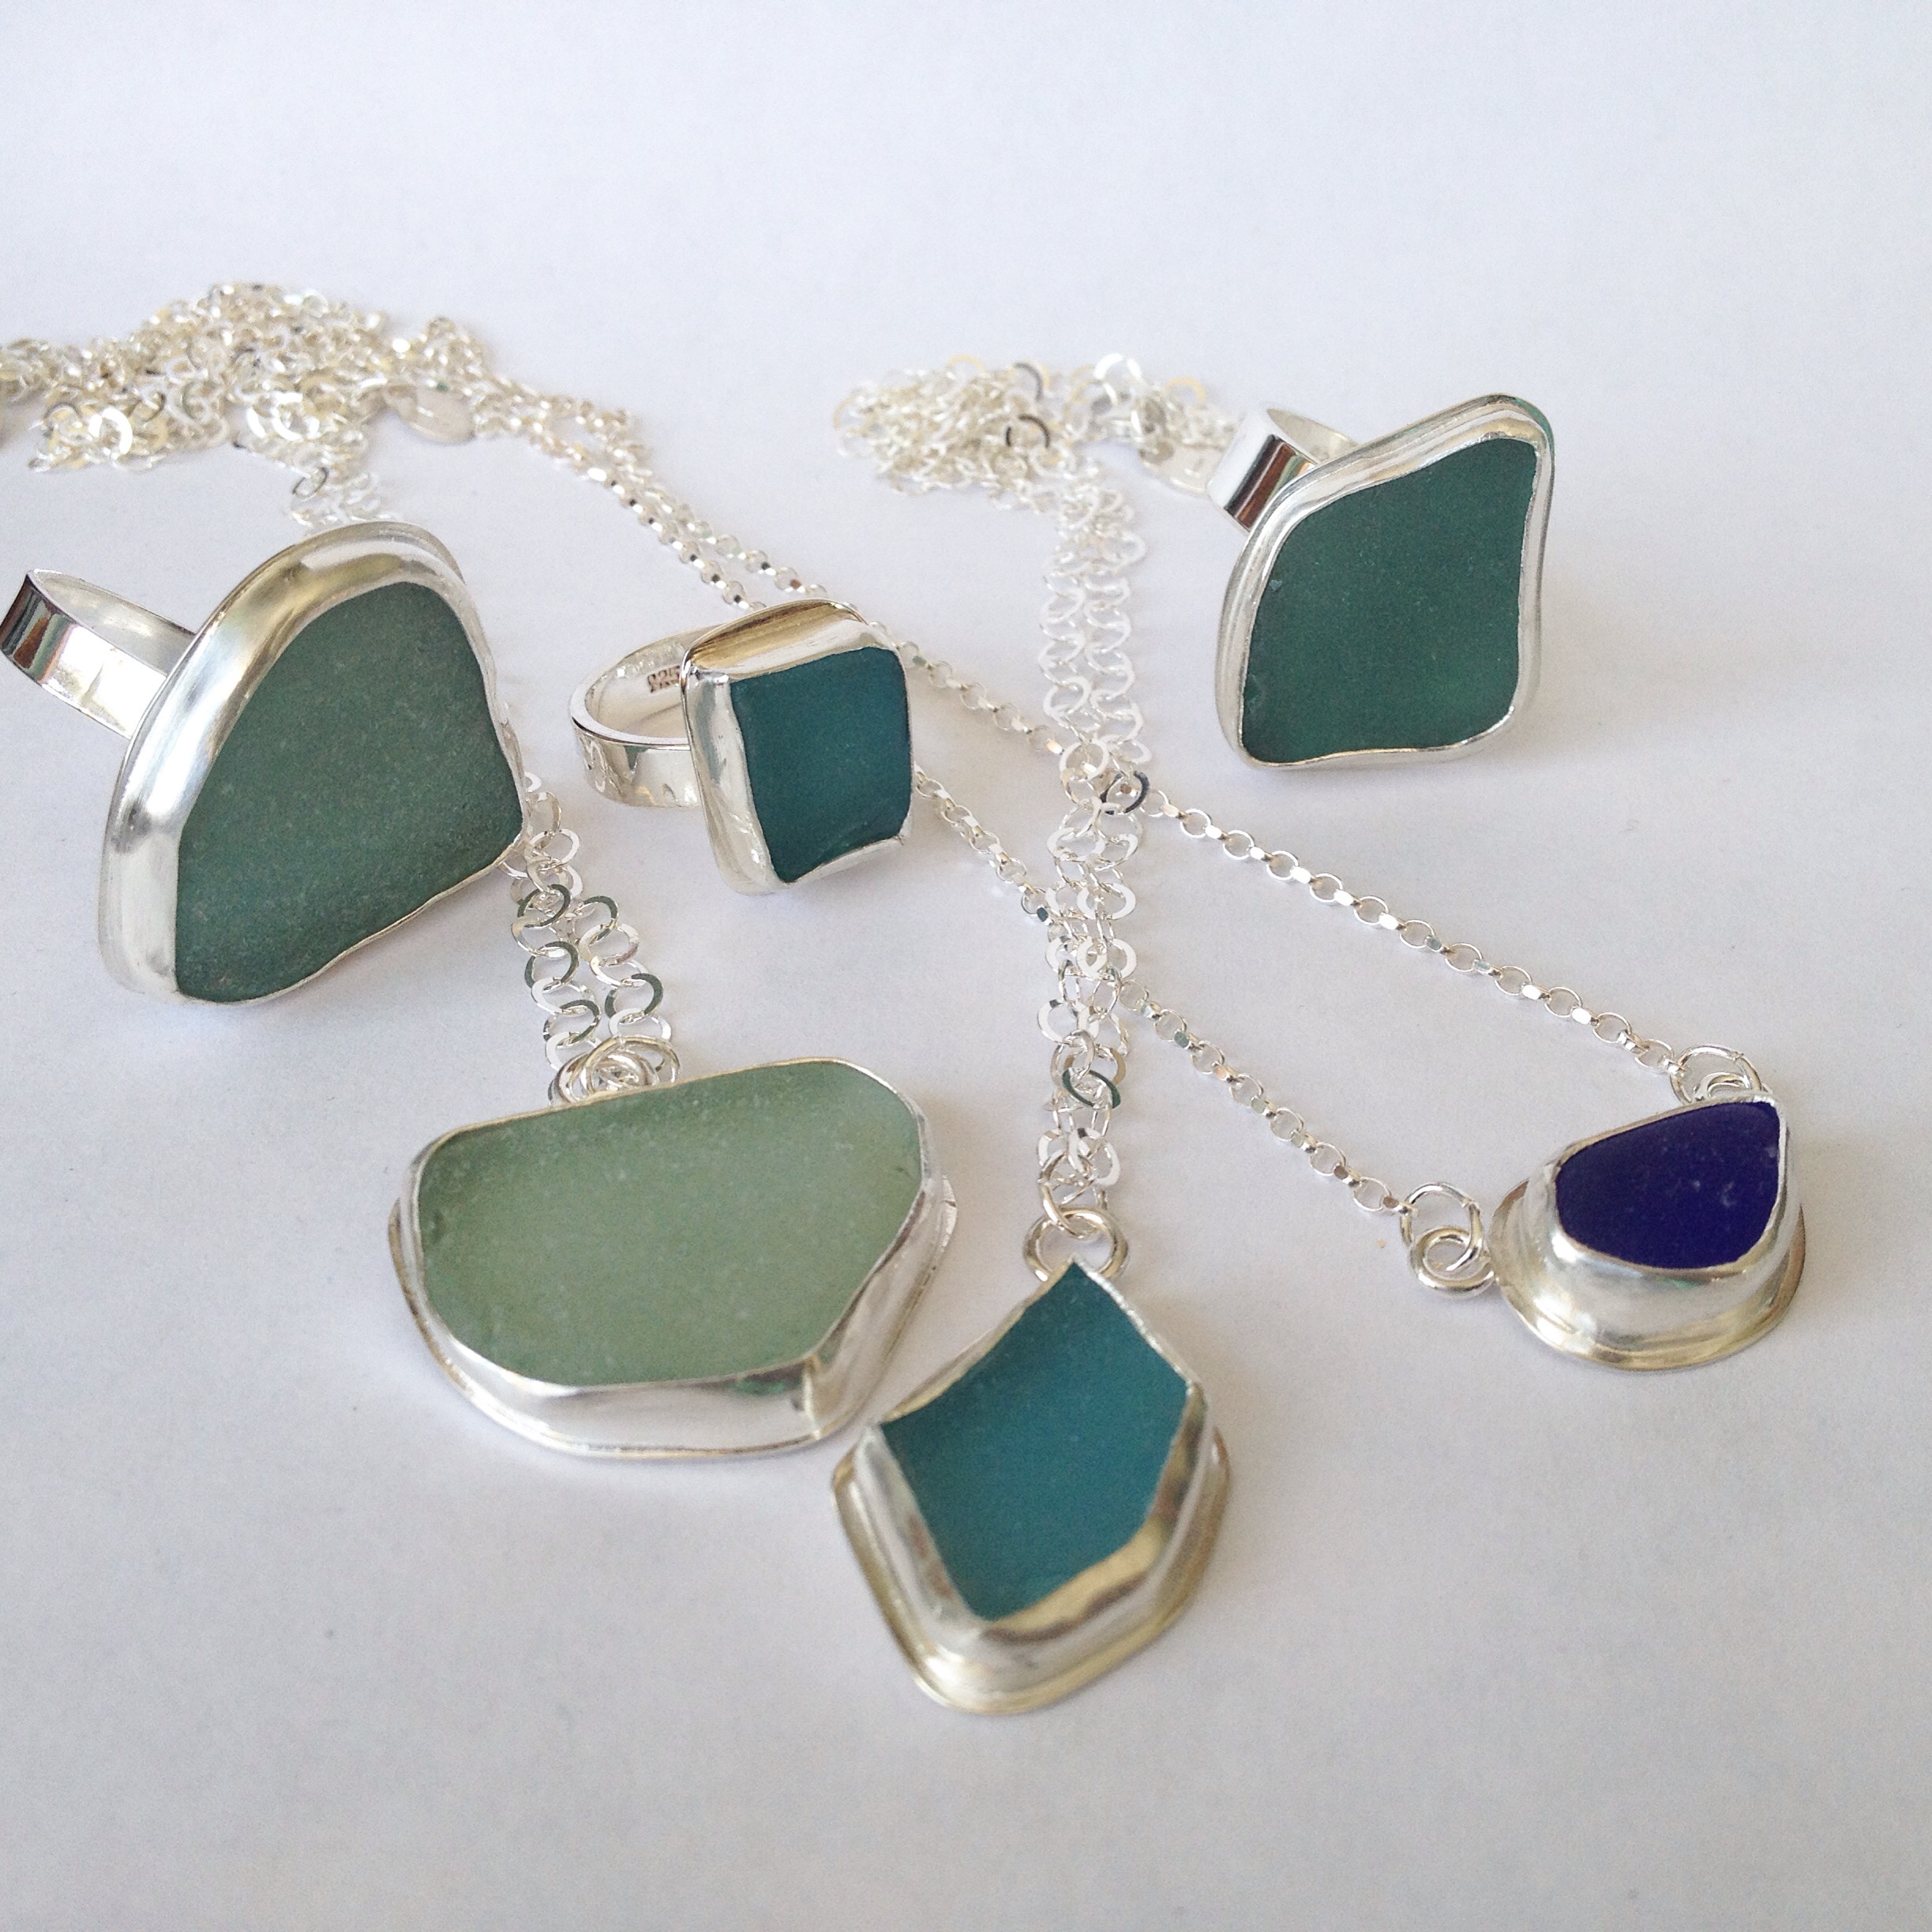 Blues and Turquoise Sea Glass Collection